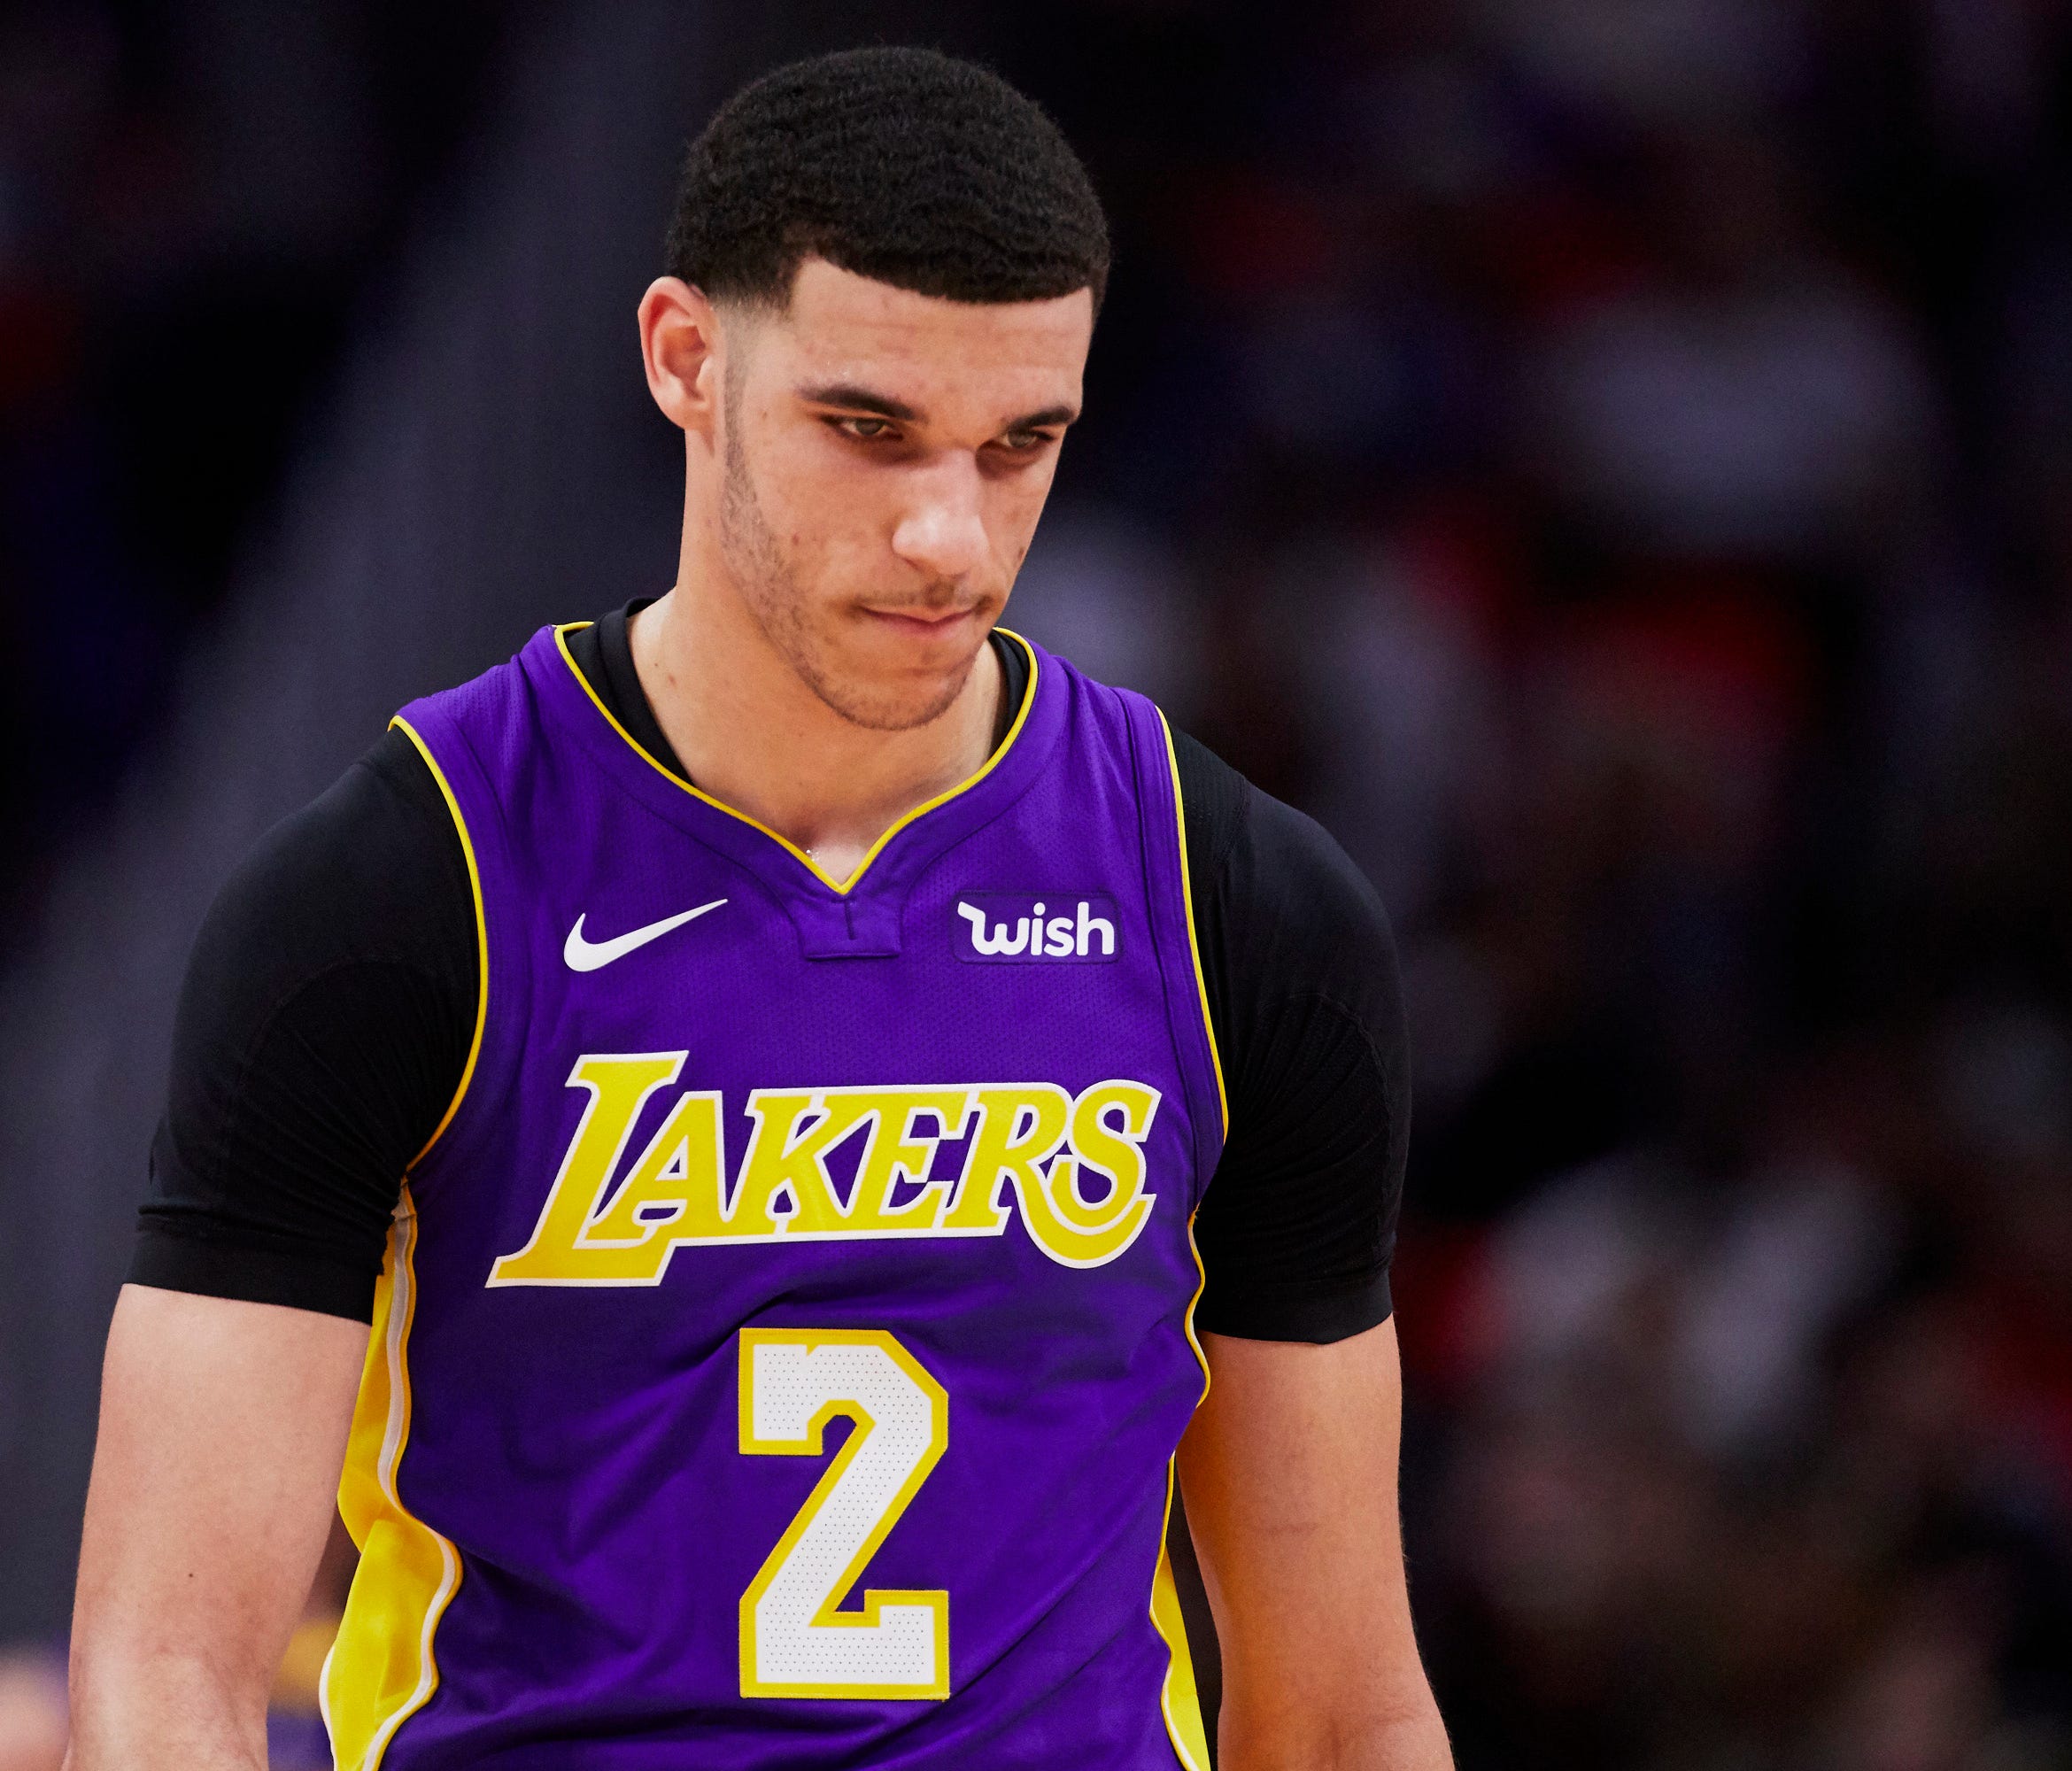 Los Angeles Lakers guard Lonzo Ball reacts during the second half of a game against the Detroit Pistons.